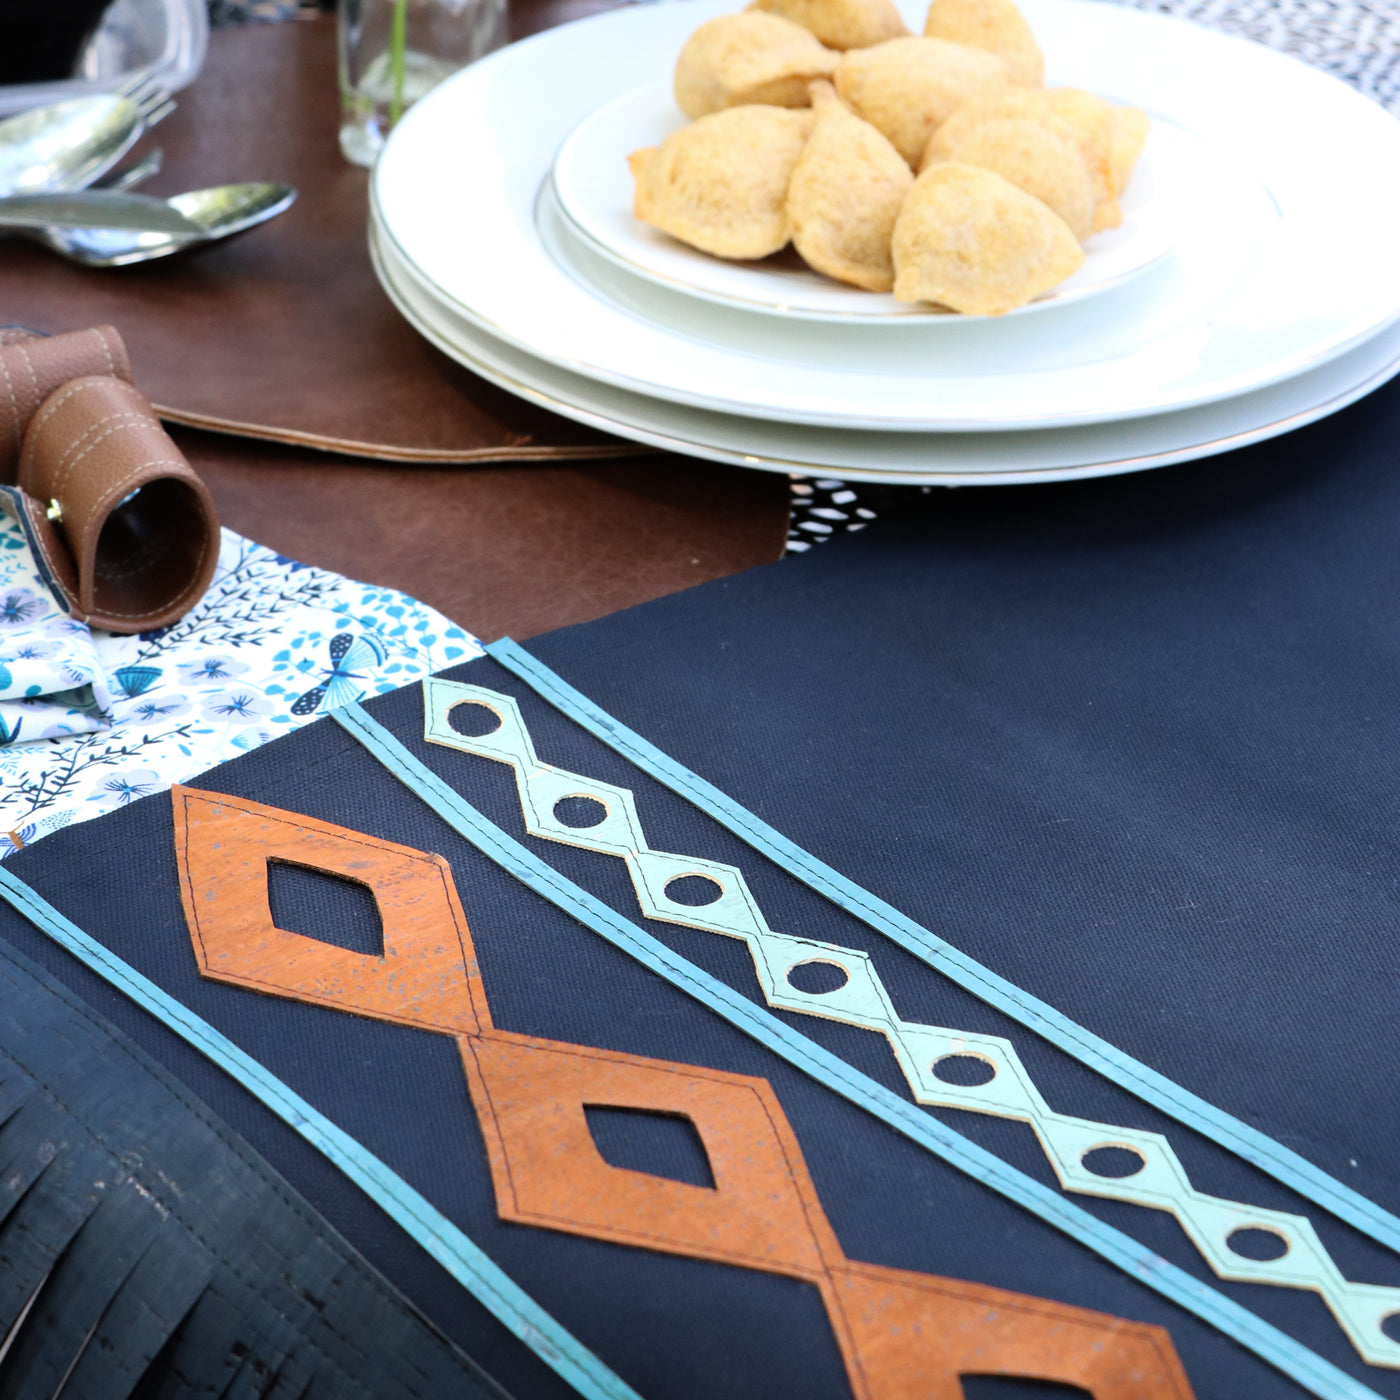 Free! Fringed Table Runner Instant Download